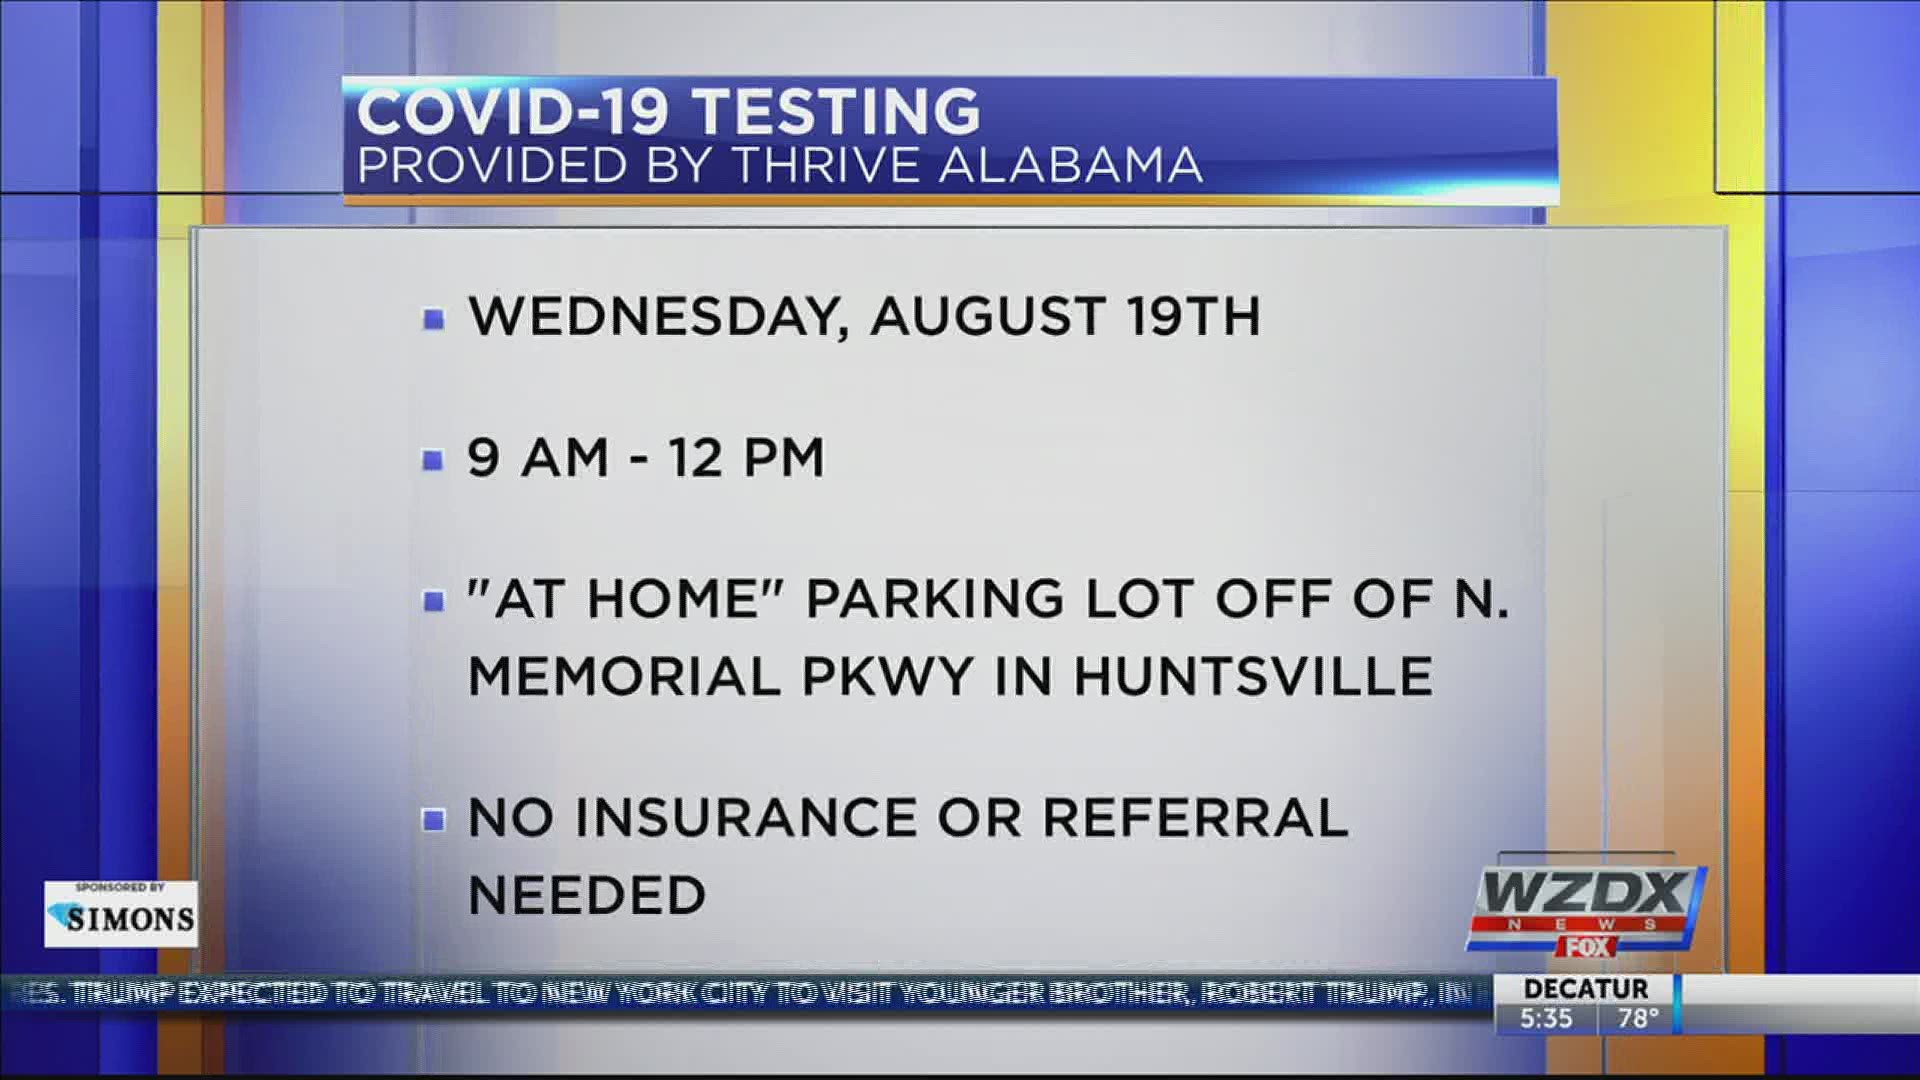 WZDX and Thrive Alabama are partnering to offer COVID-19 testing in Huntsville.